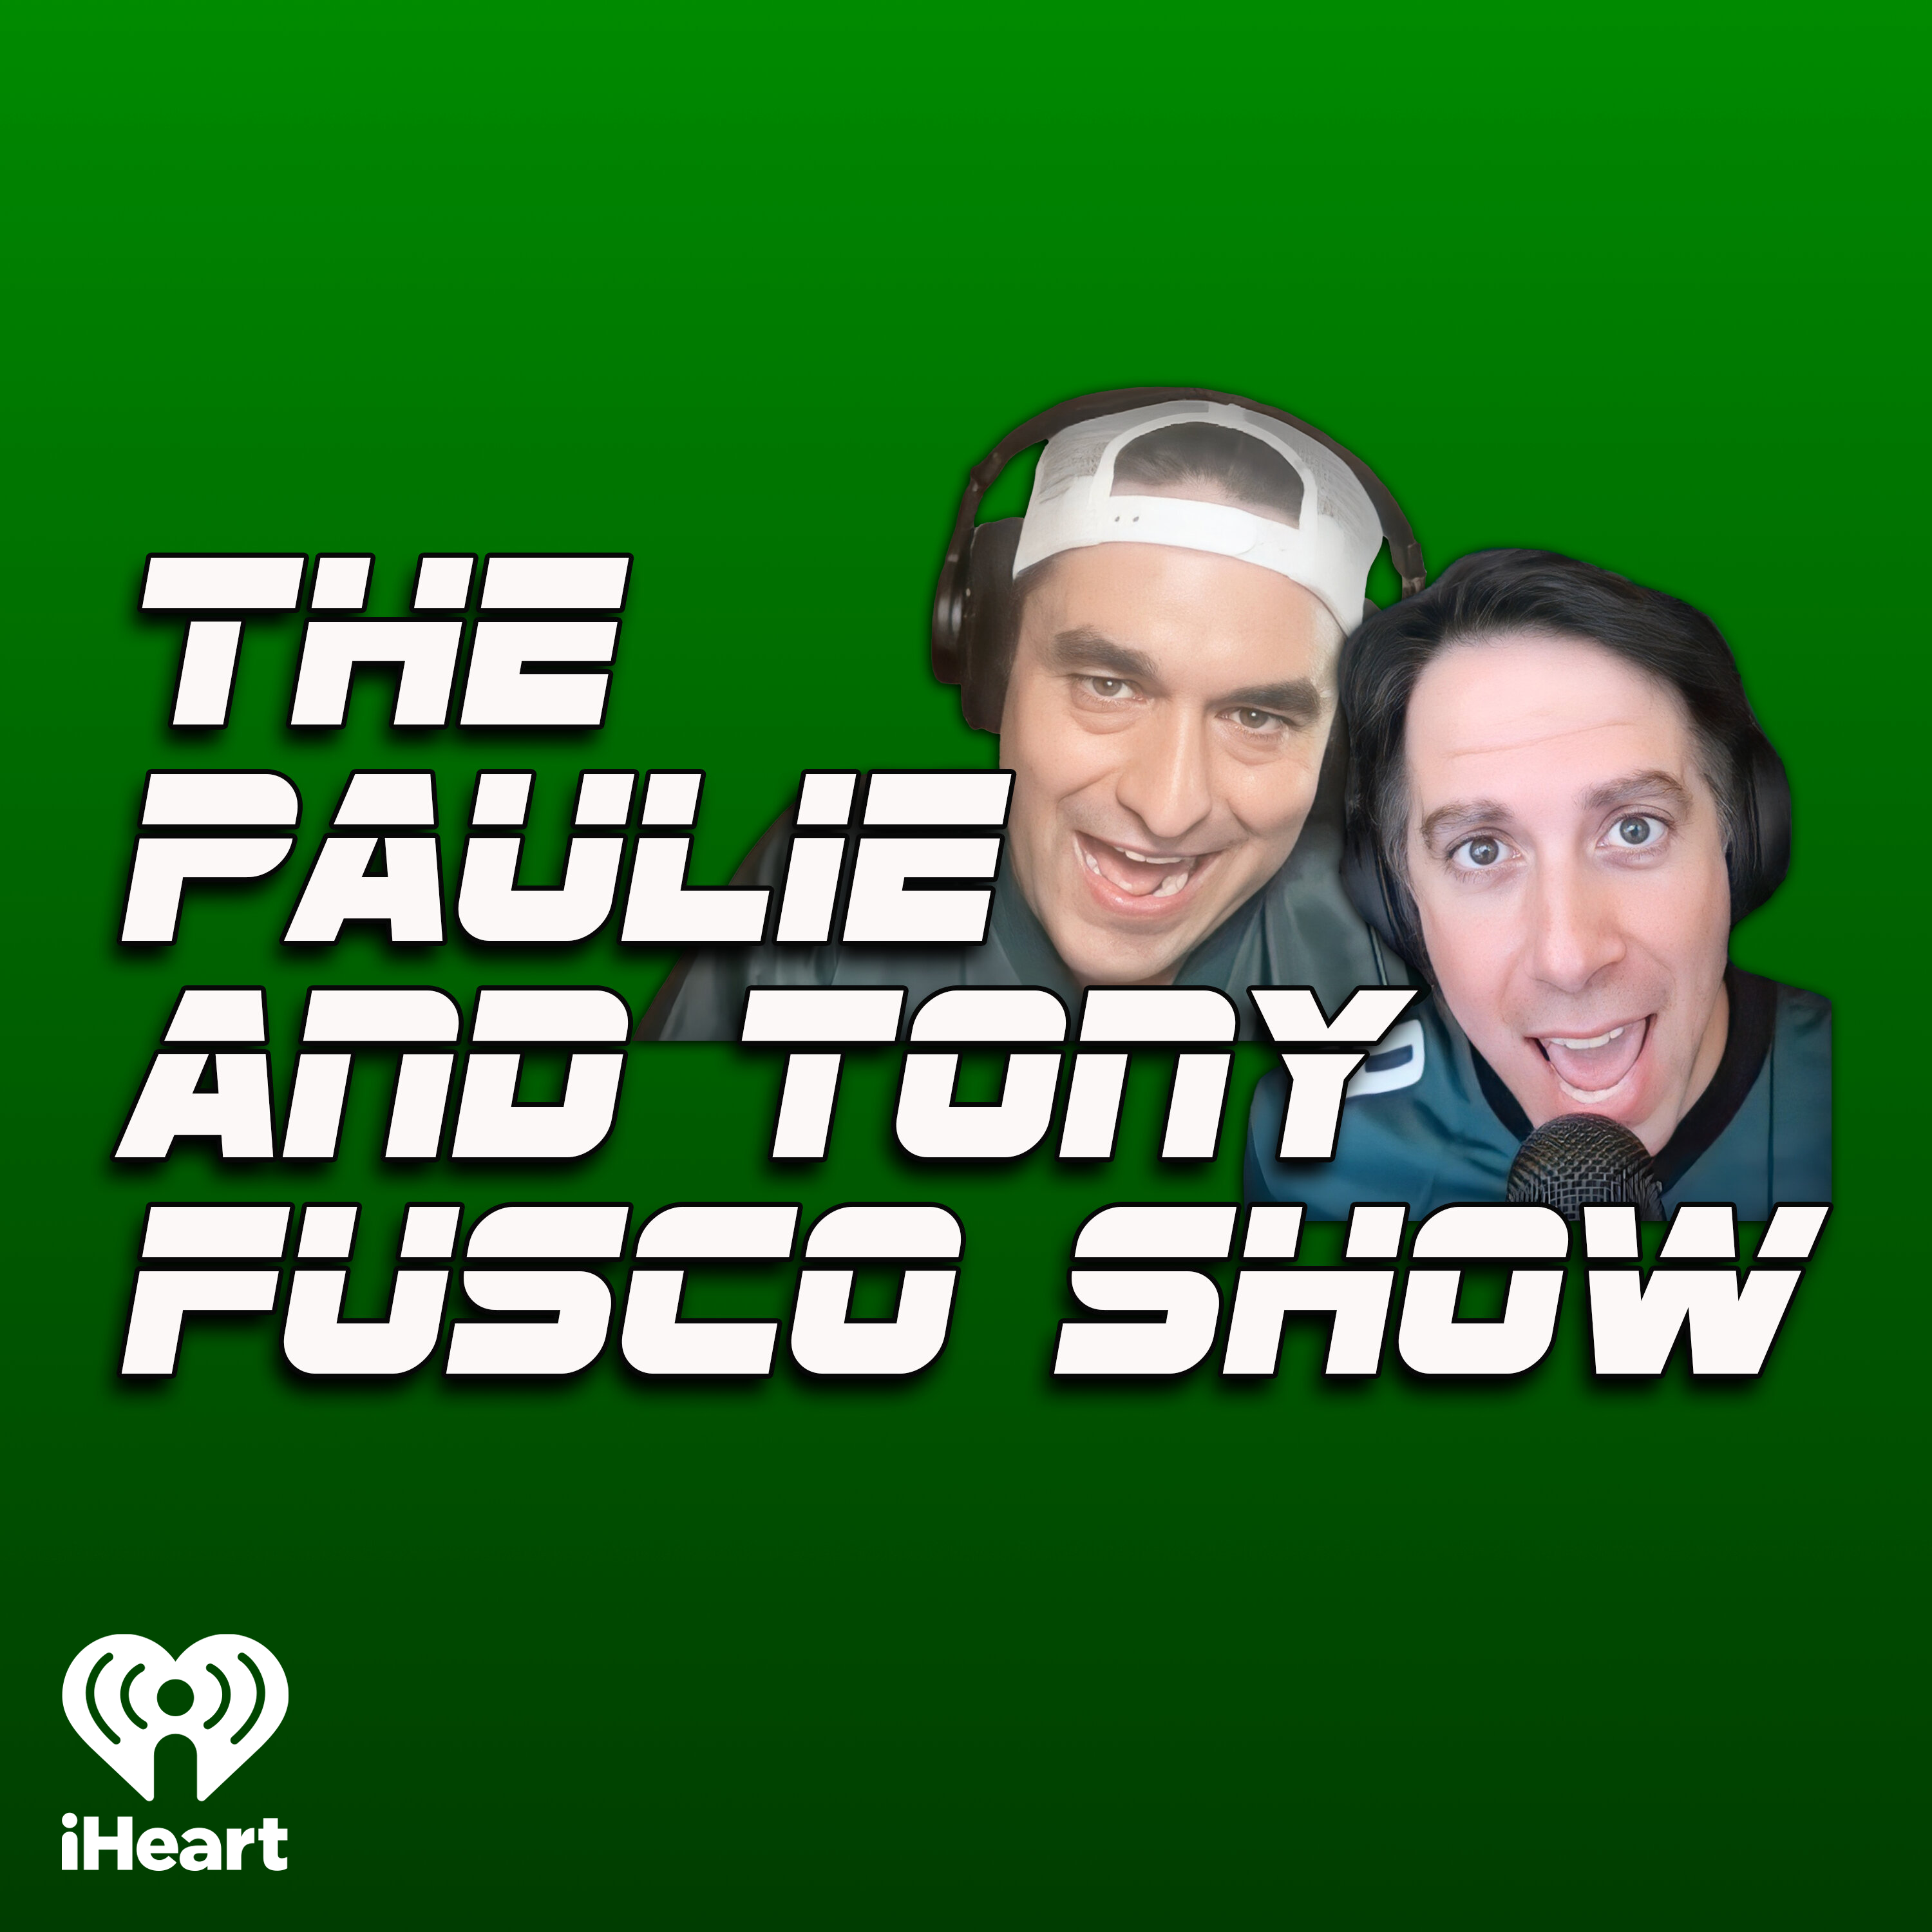 The Paulie & Tony Fusco Show: NFL free agency winners (Eagles) and BIGTIME losers (Cowboys & Giants)